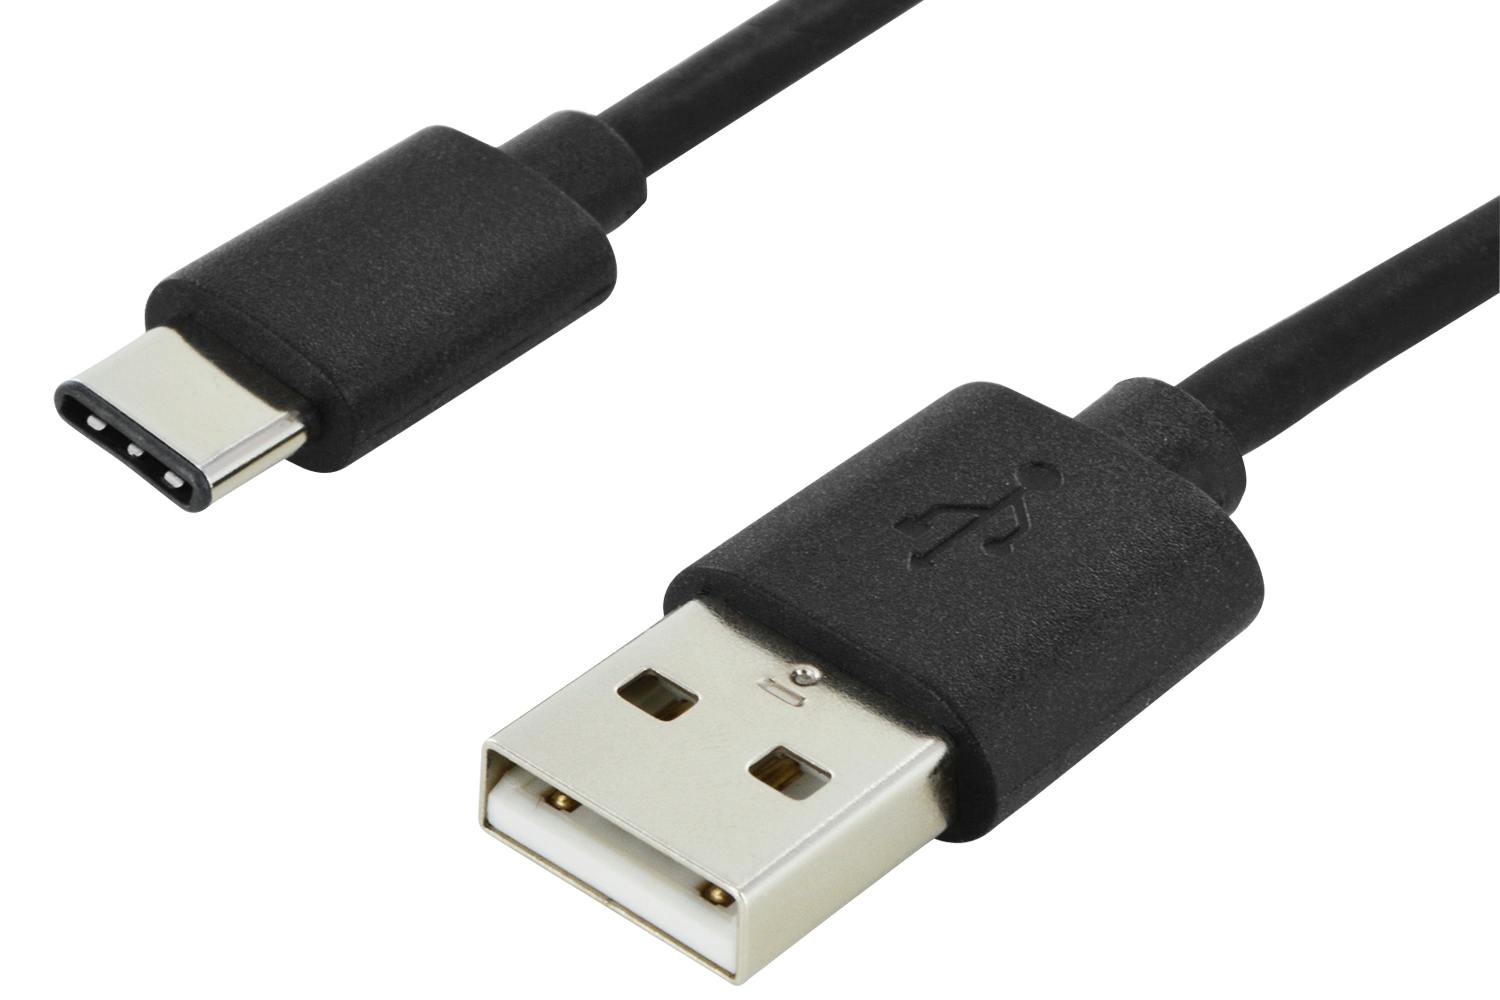 Ednet Usb Type C To Type A Cable 1 8m Ireland